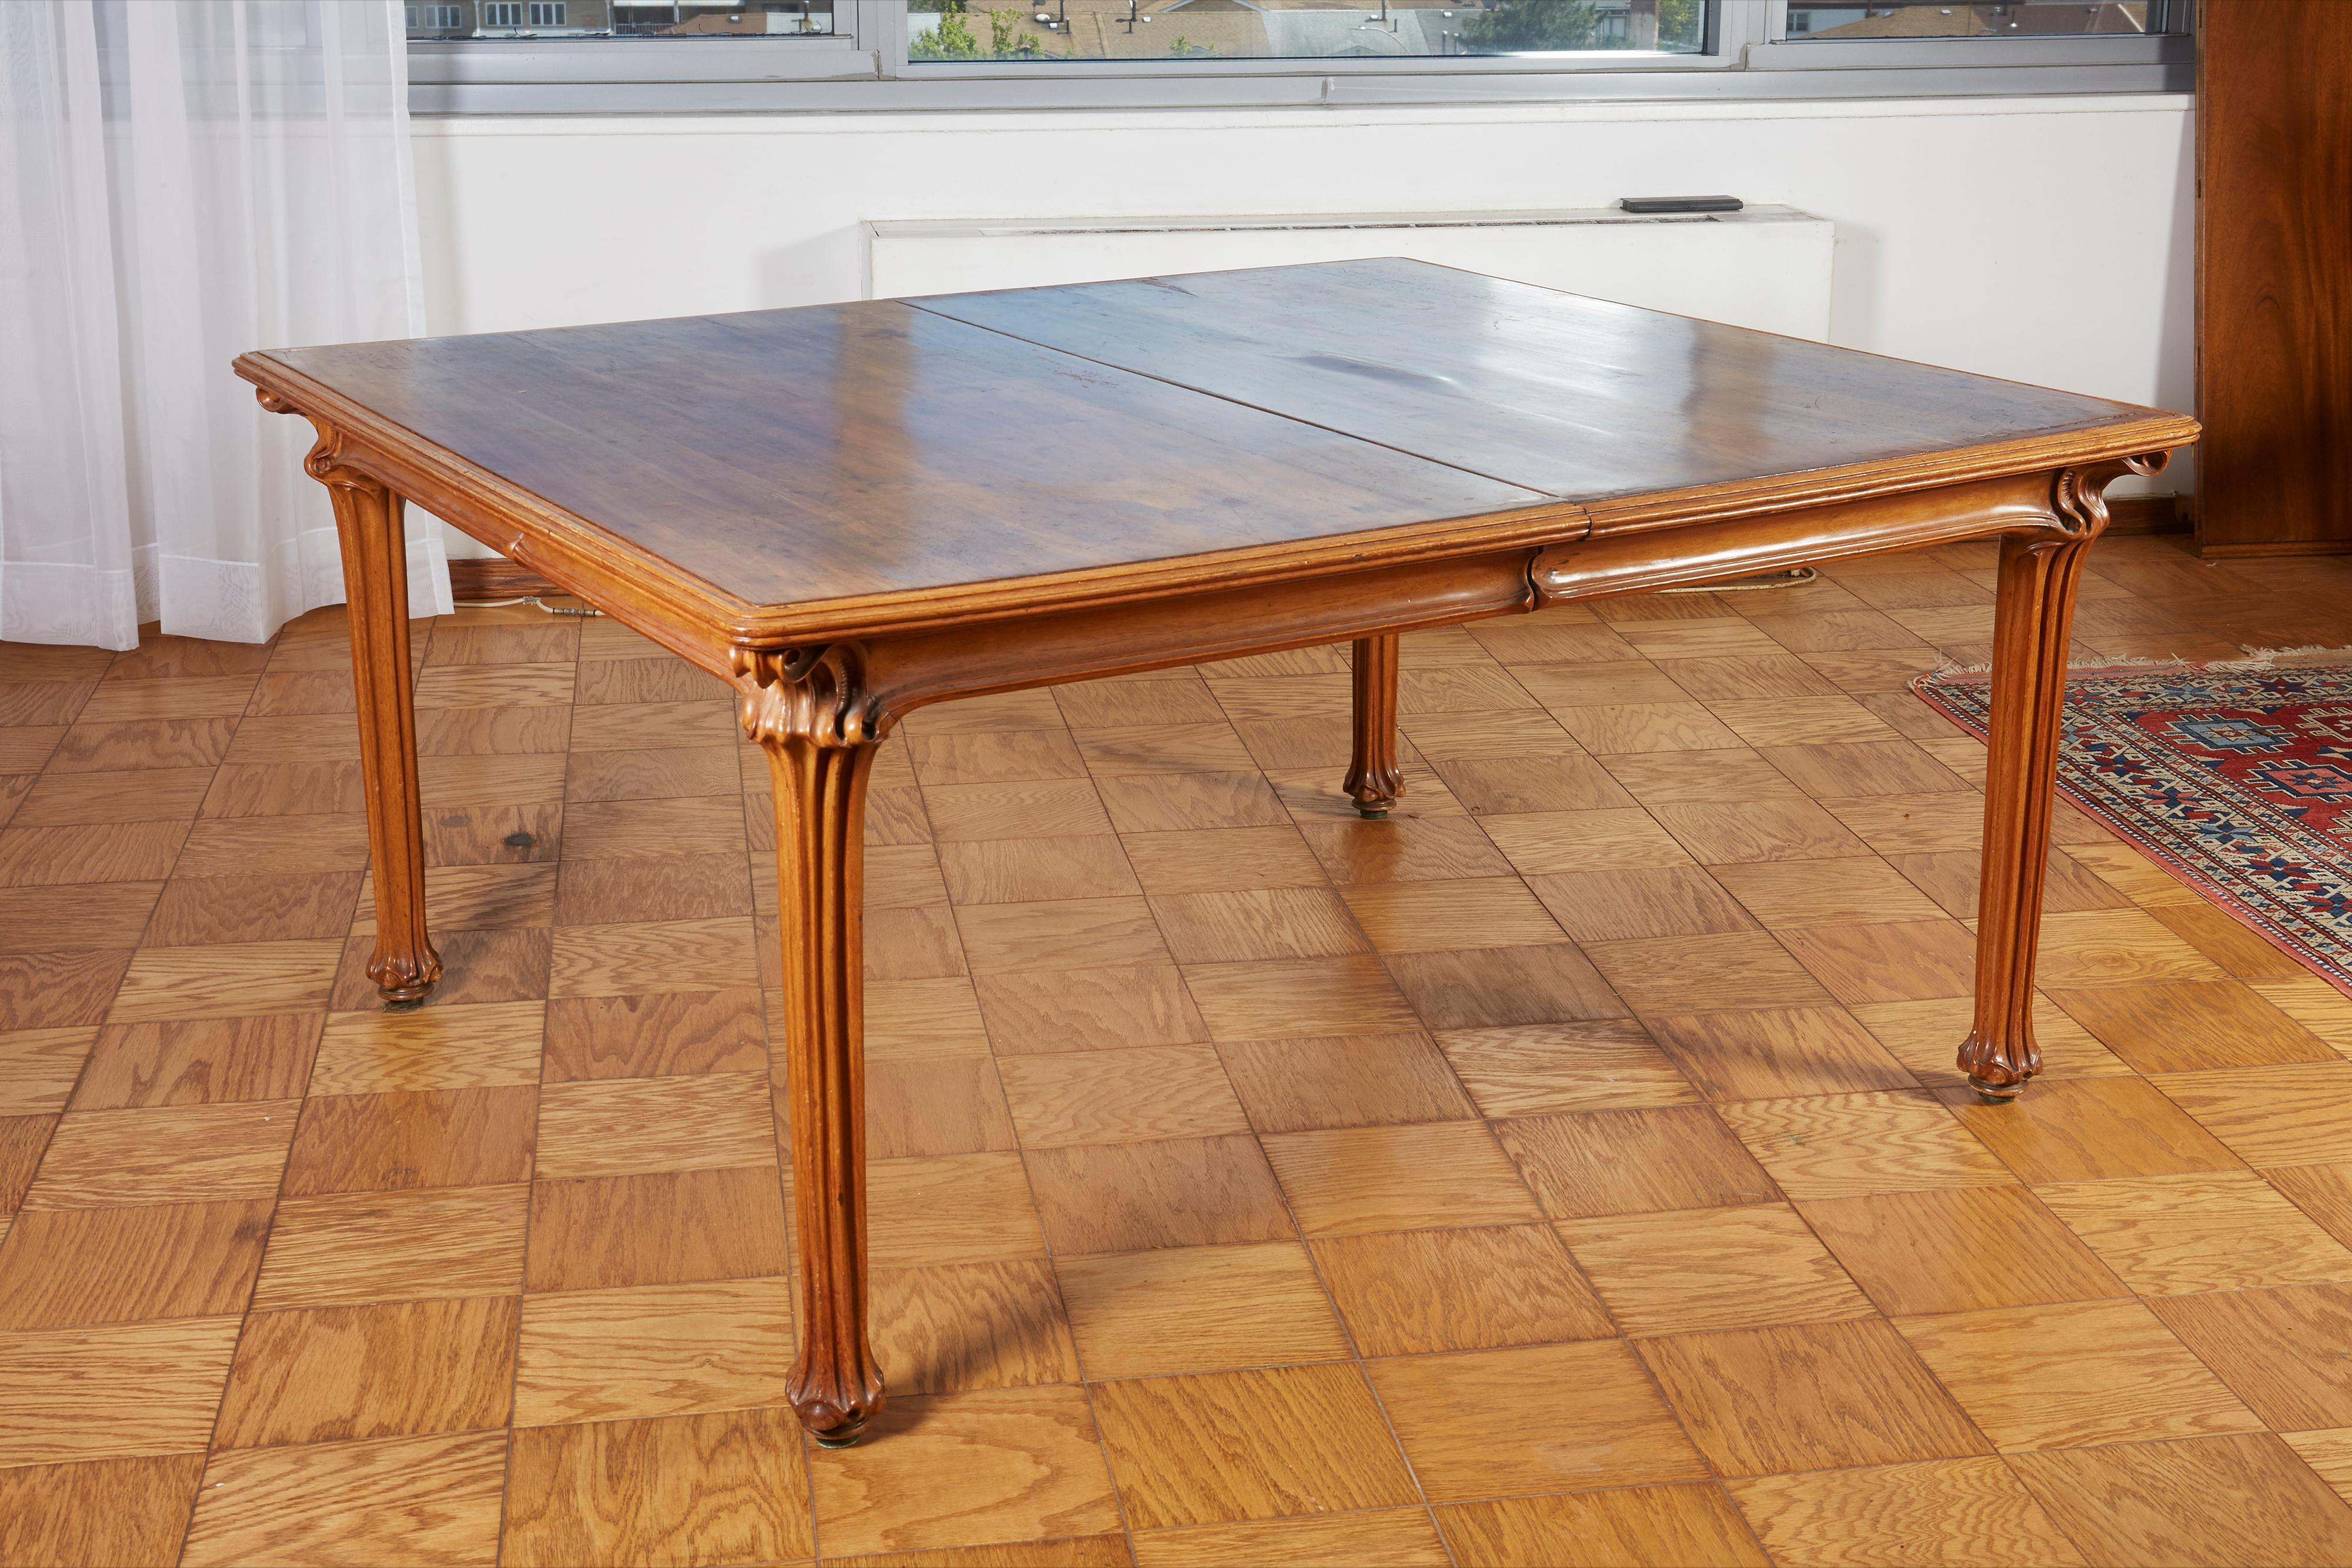 Wood Galle Large Dining Room Table For Sale